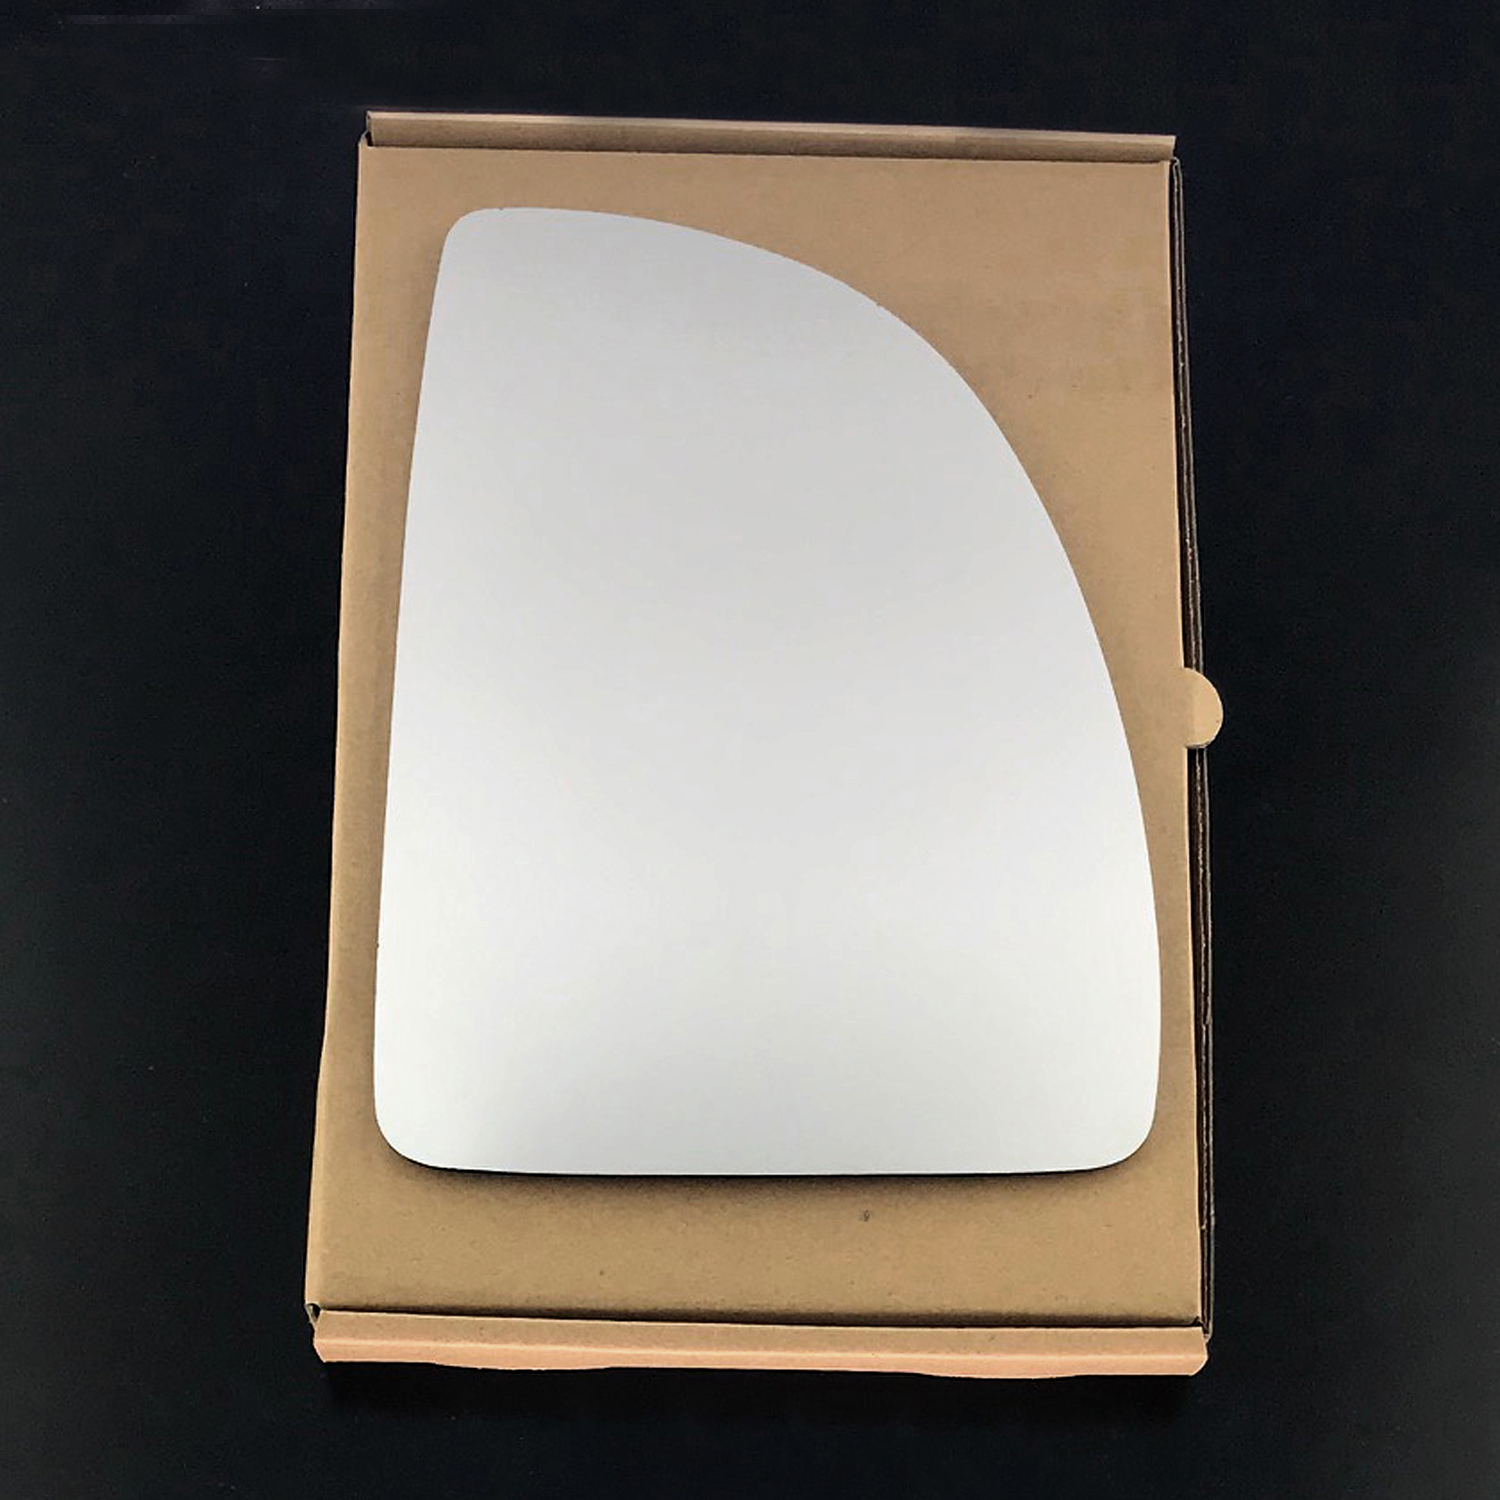 Citroen Relay Wing Mirror Glass RIGHT HAND ( UK Driver Side ) 1998 to 2006 – Convex Wing Mirror